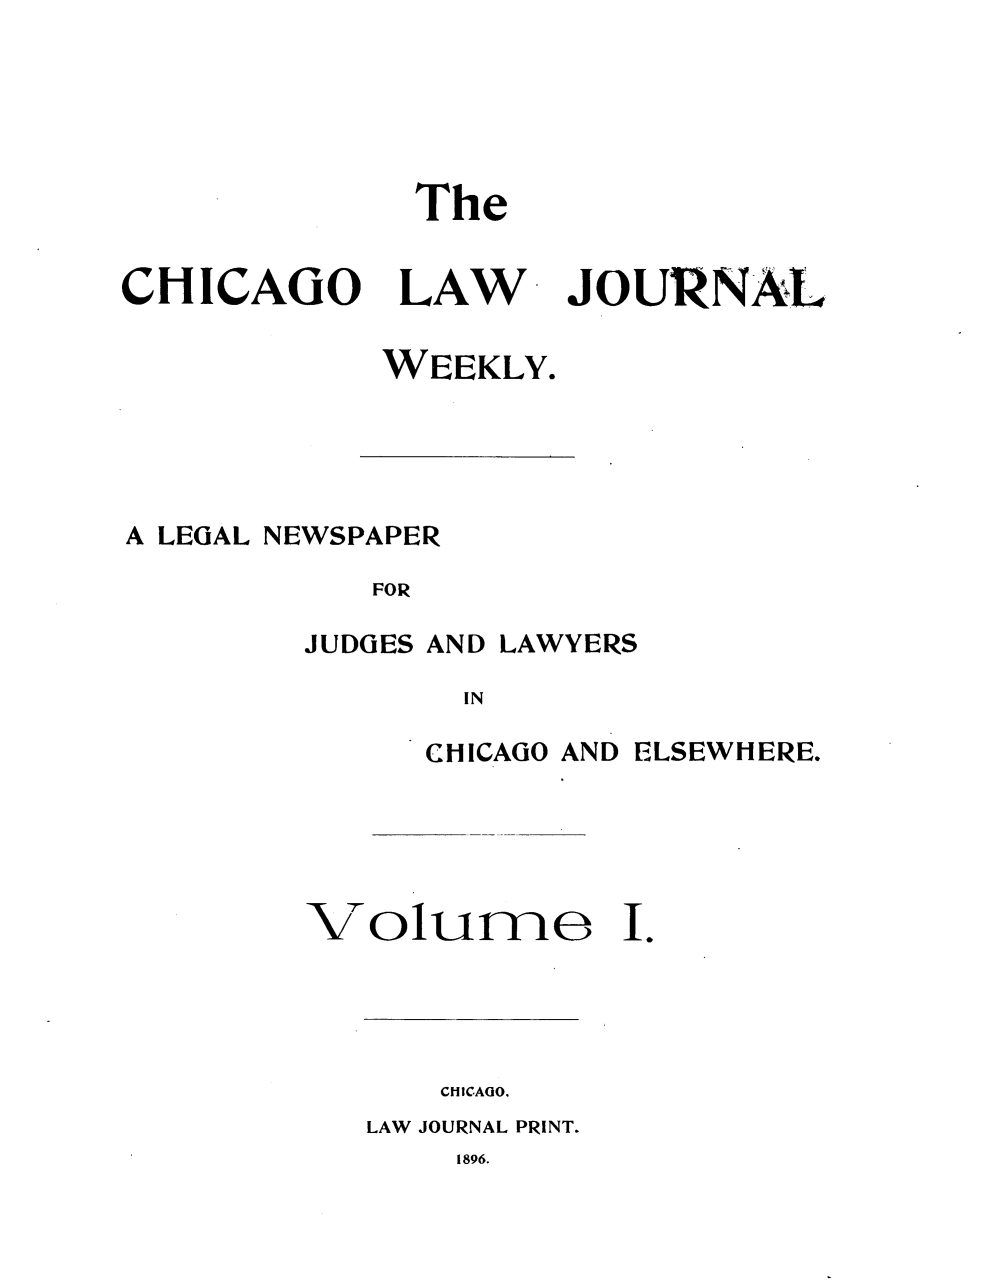 handle is hein.journals/chcgolwjrnl1 and id is 1 raw text is: The

CHICAGO

LAW

JOURNAL

WEEKLY.

A LEGAL NEWSPAPER
FOR

JUDGES

AND LAWYERS

IN

CHICAGO AND

Volurne

ELSEWHERE.

I.

CHICAGO.
LAW JOURNAL PRINT.

1896.


